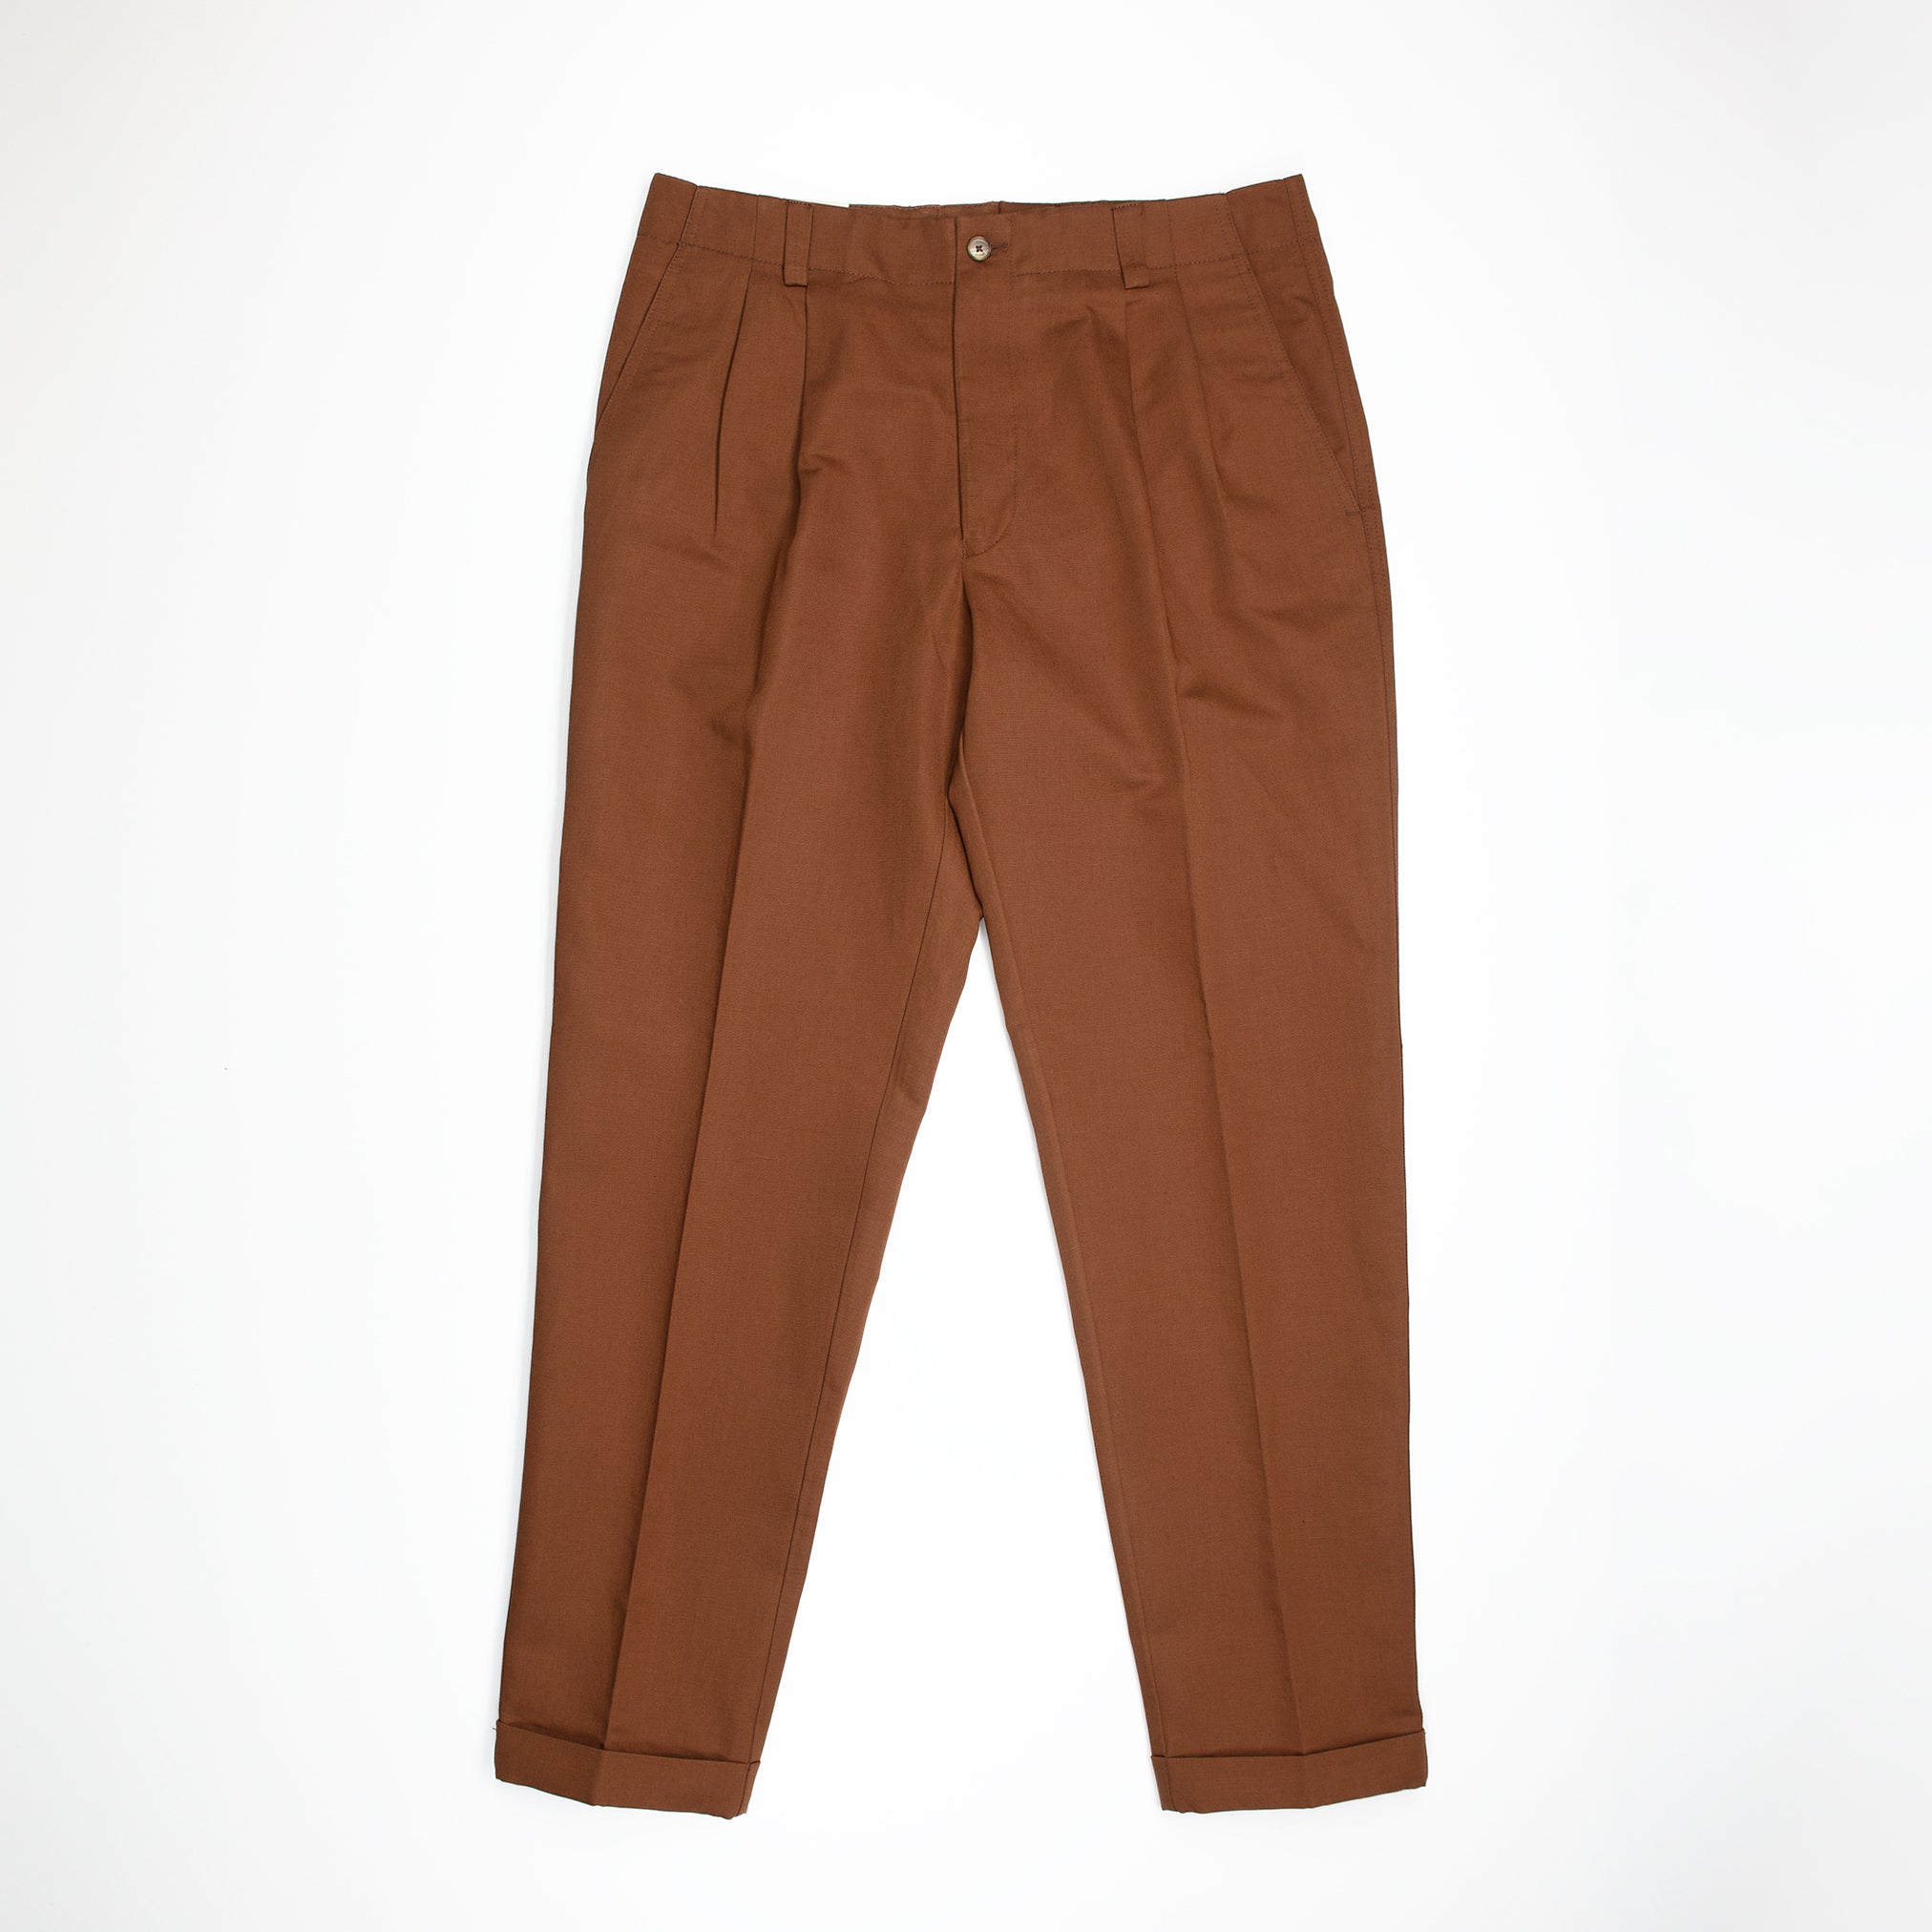 Cardiff Cotton & Linen Pants in Biscuit